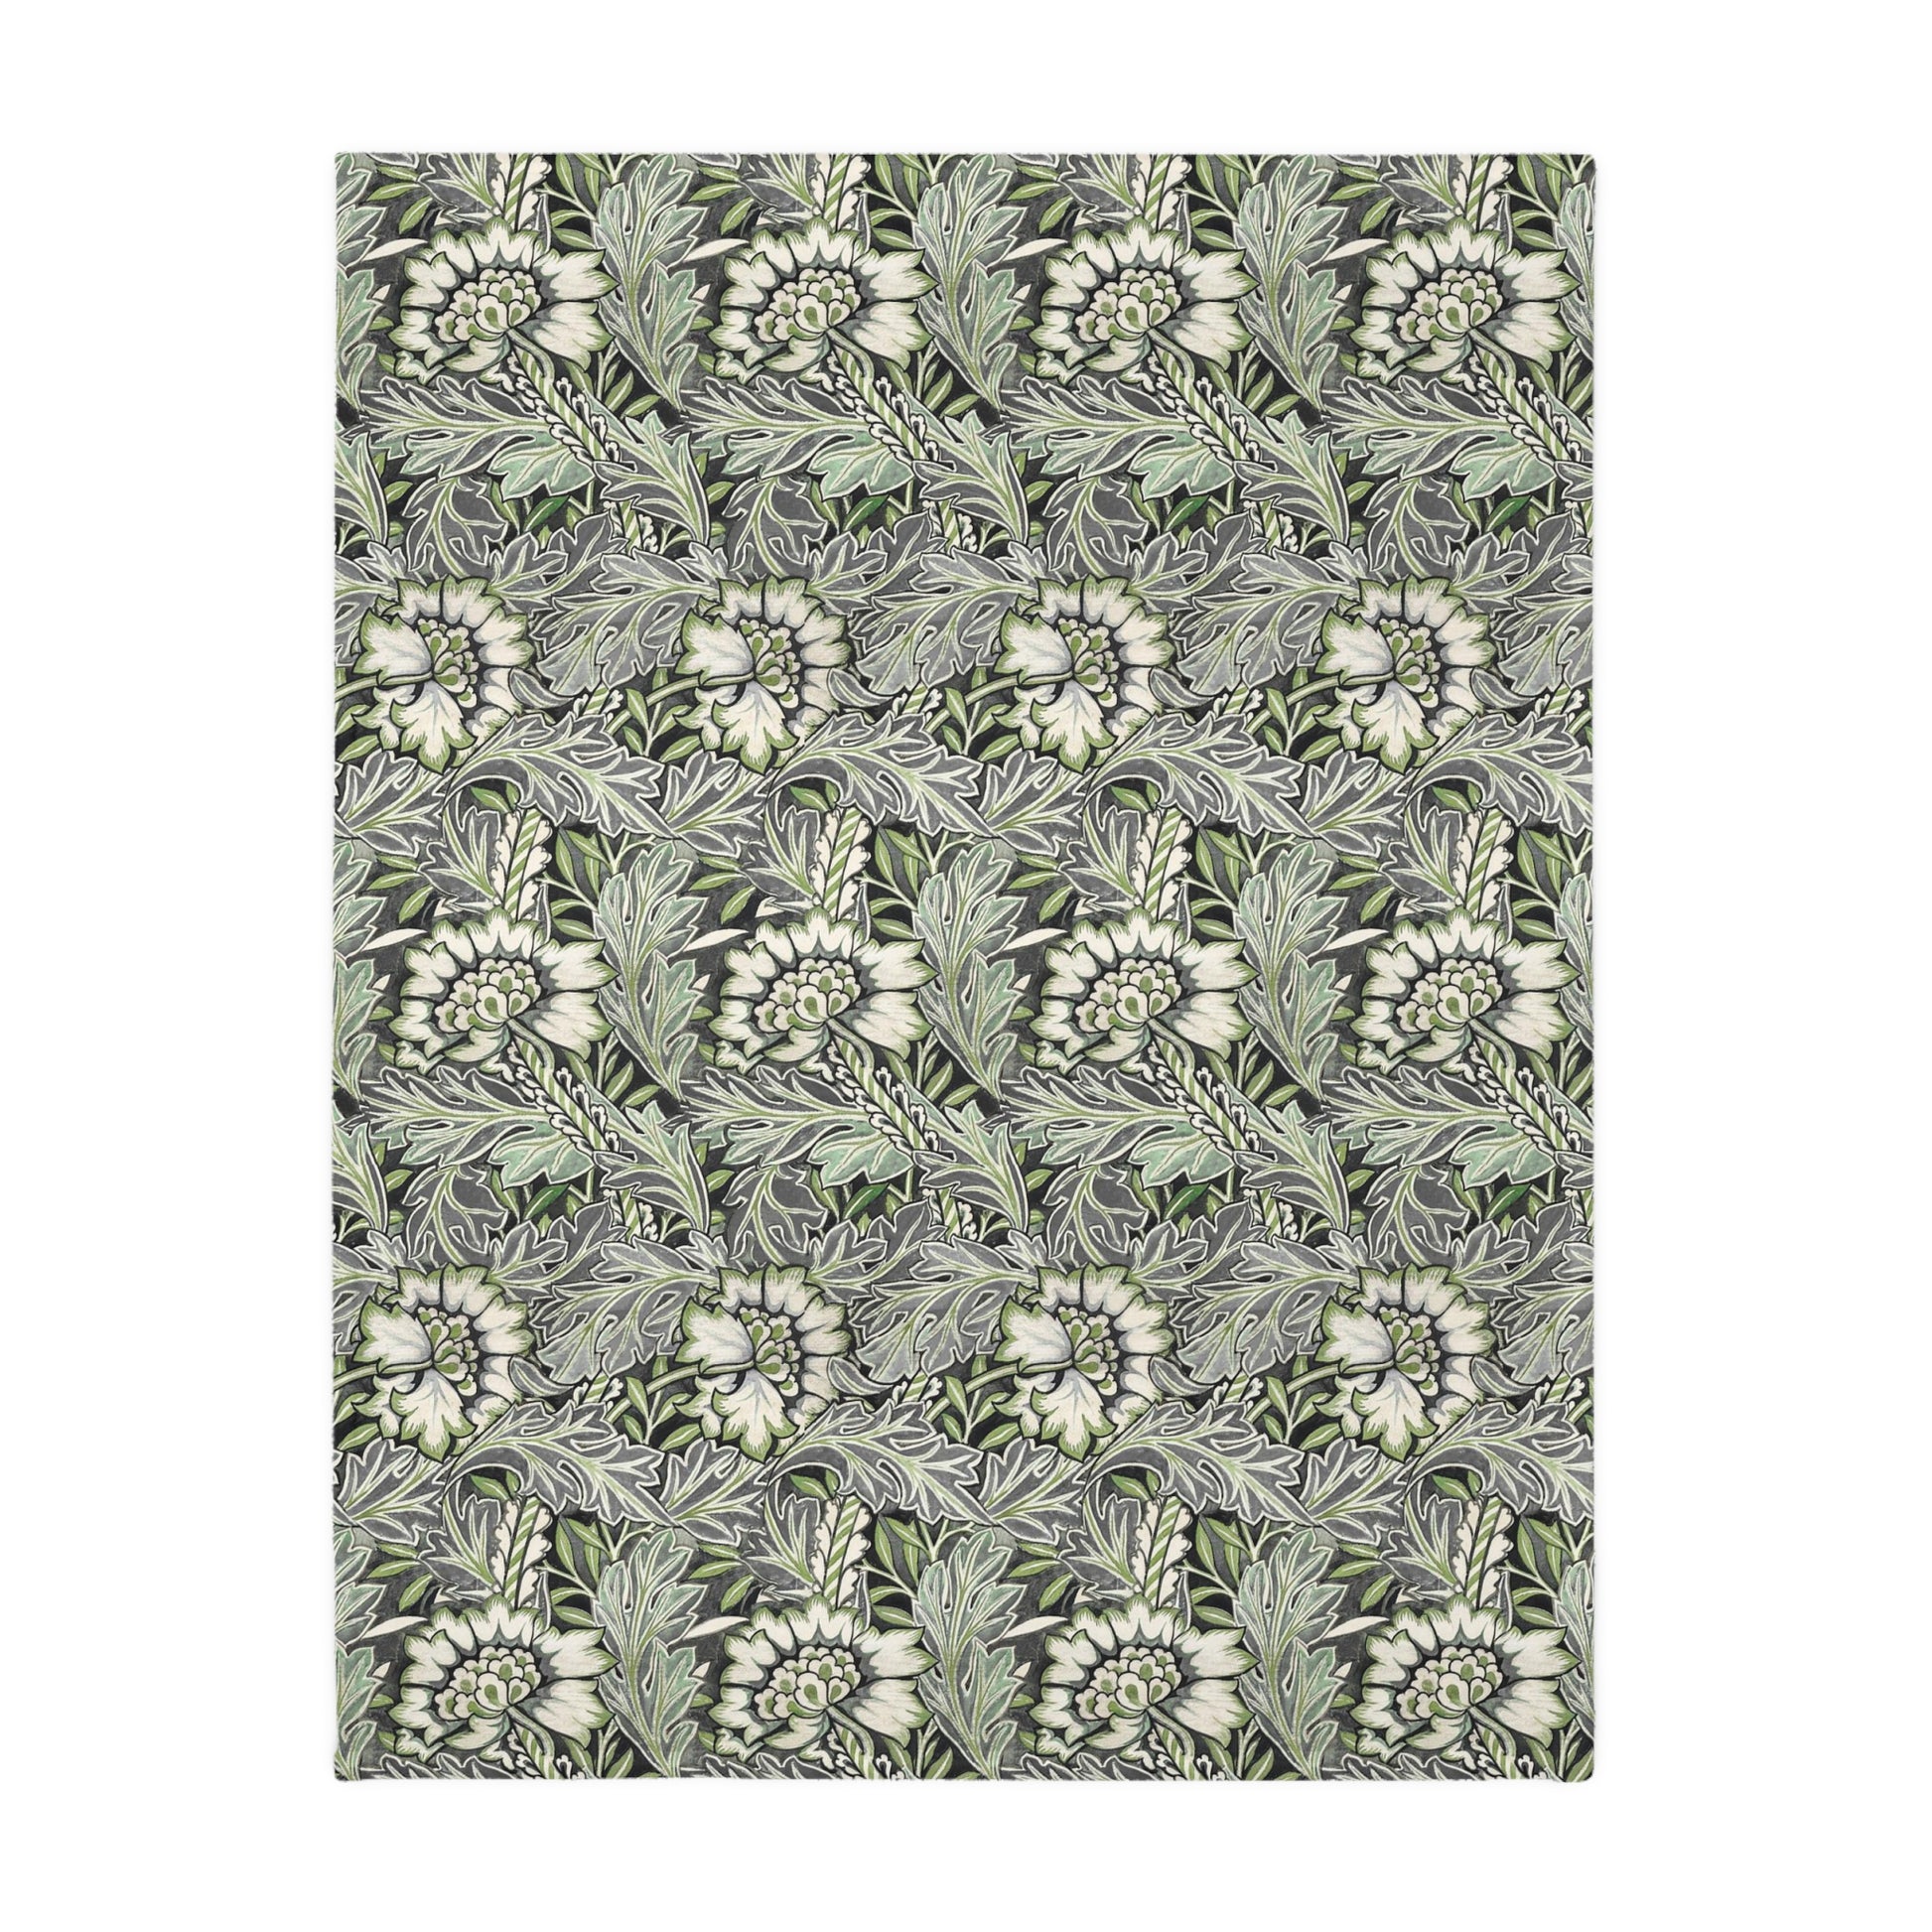 william-morris-co-luxury-velveteen-minky-blanket-two-sided-print-anemone-collection-5